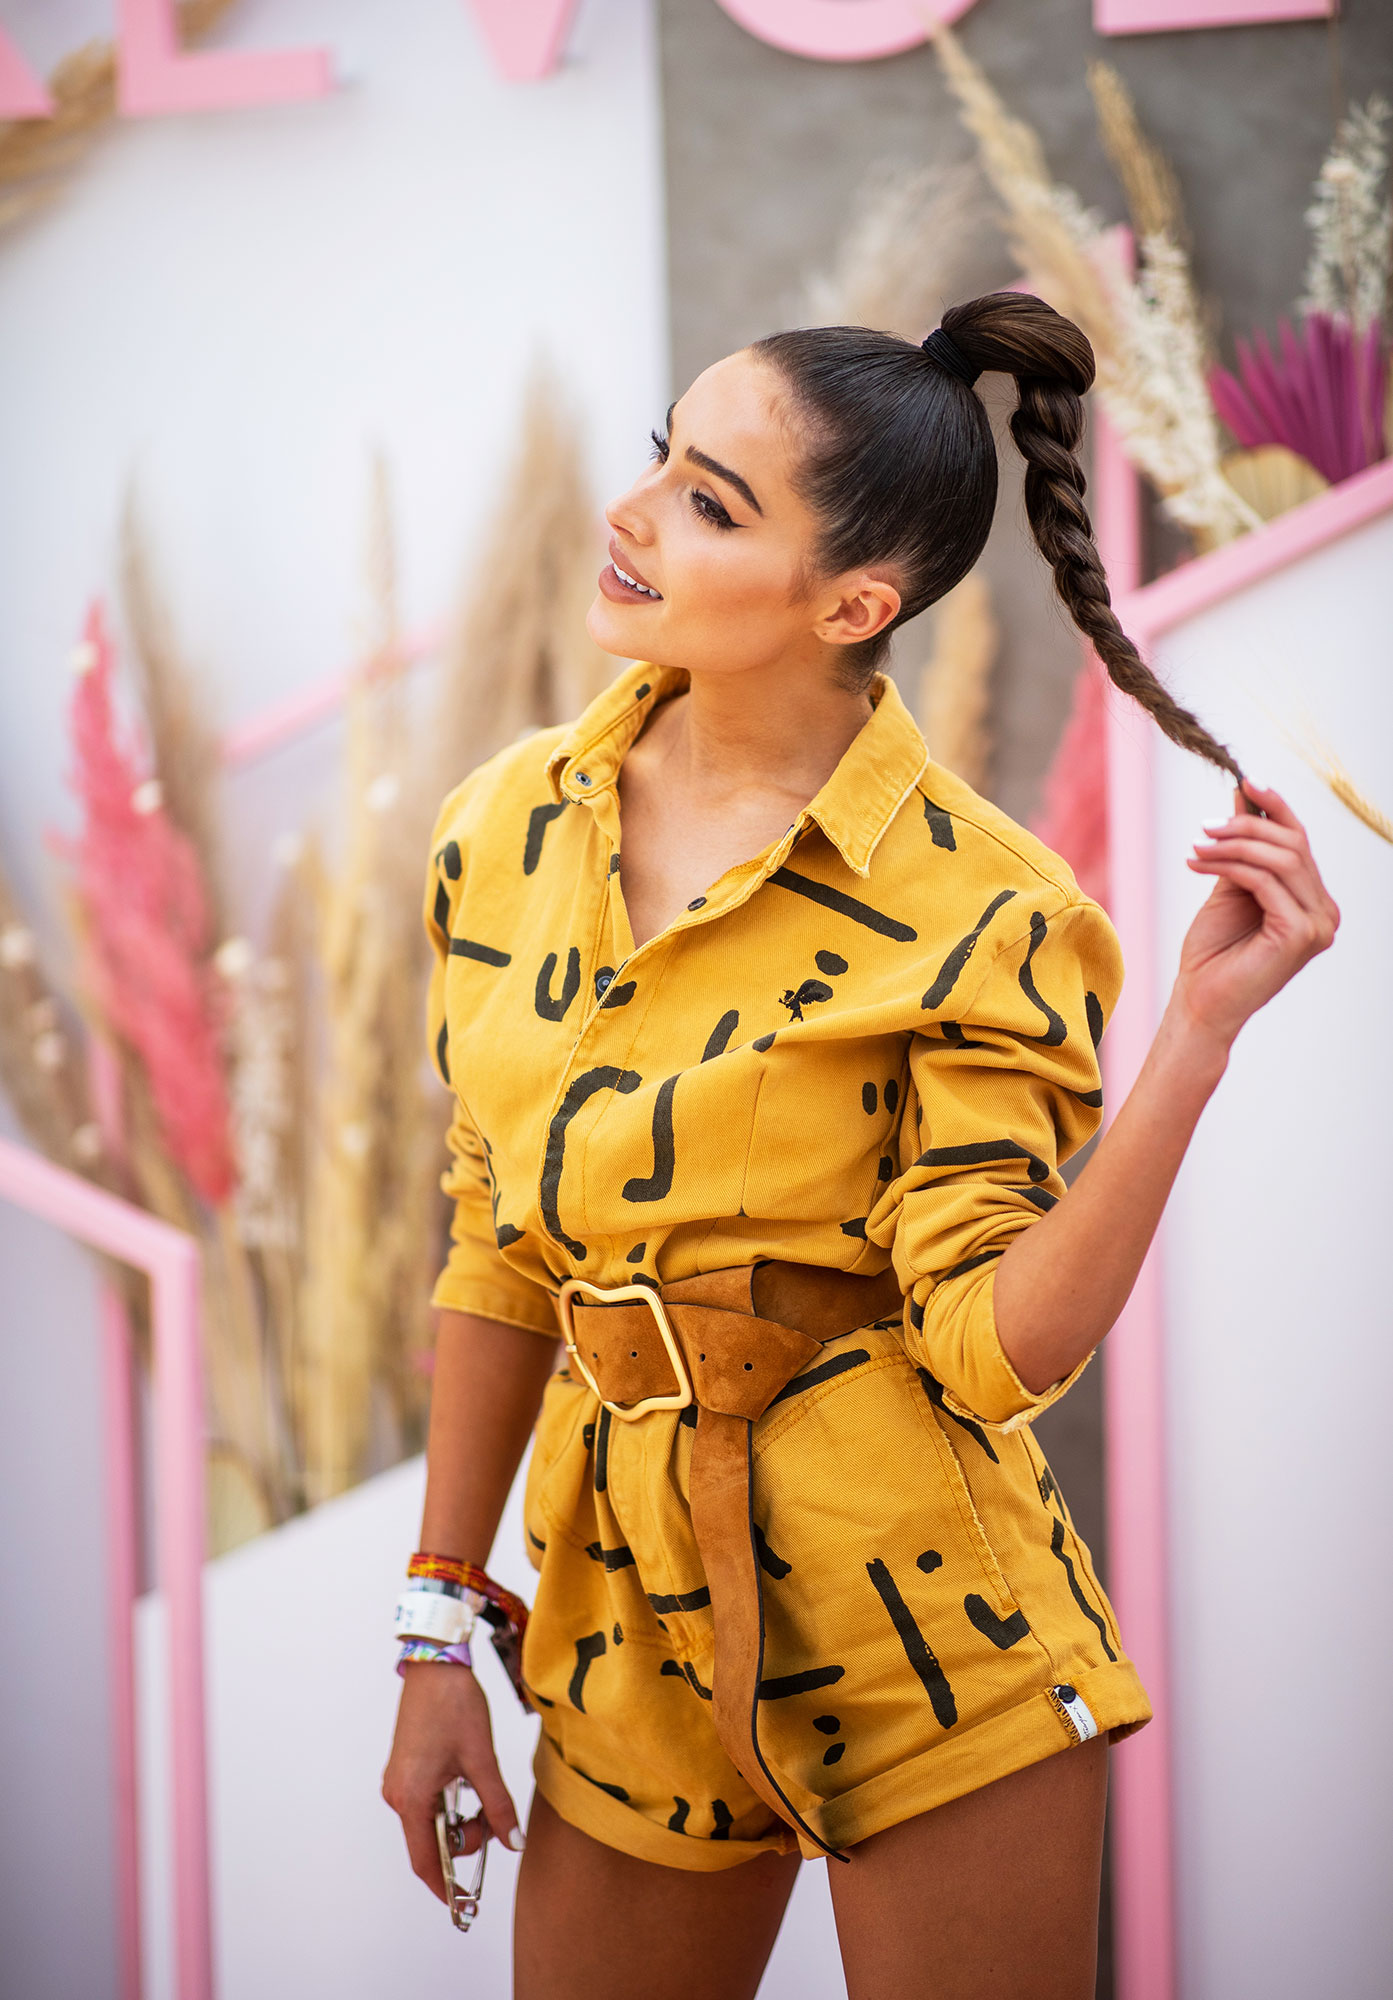 The Best Celebrity Looks From Coachella 2019